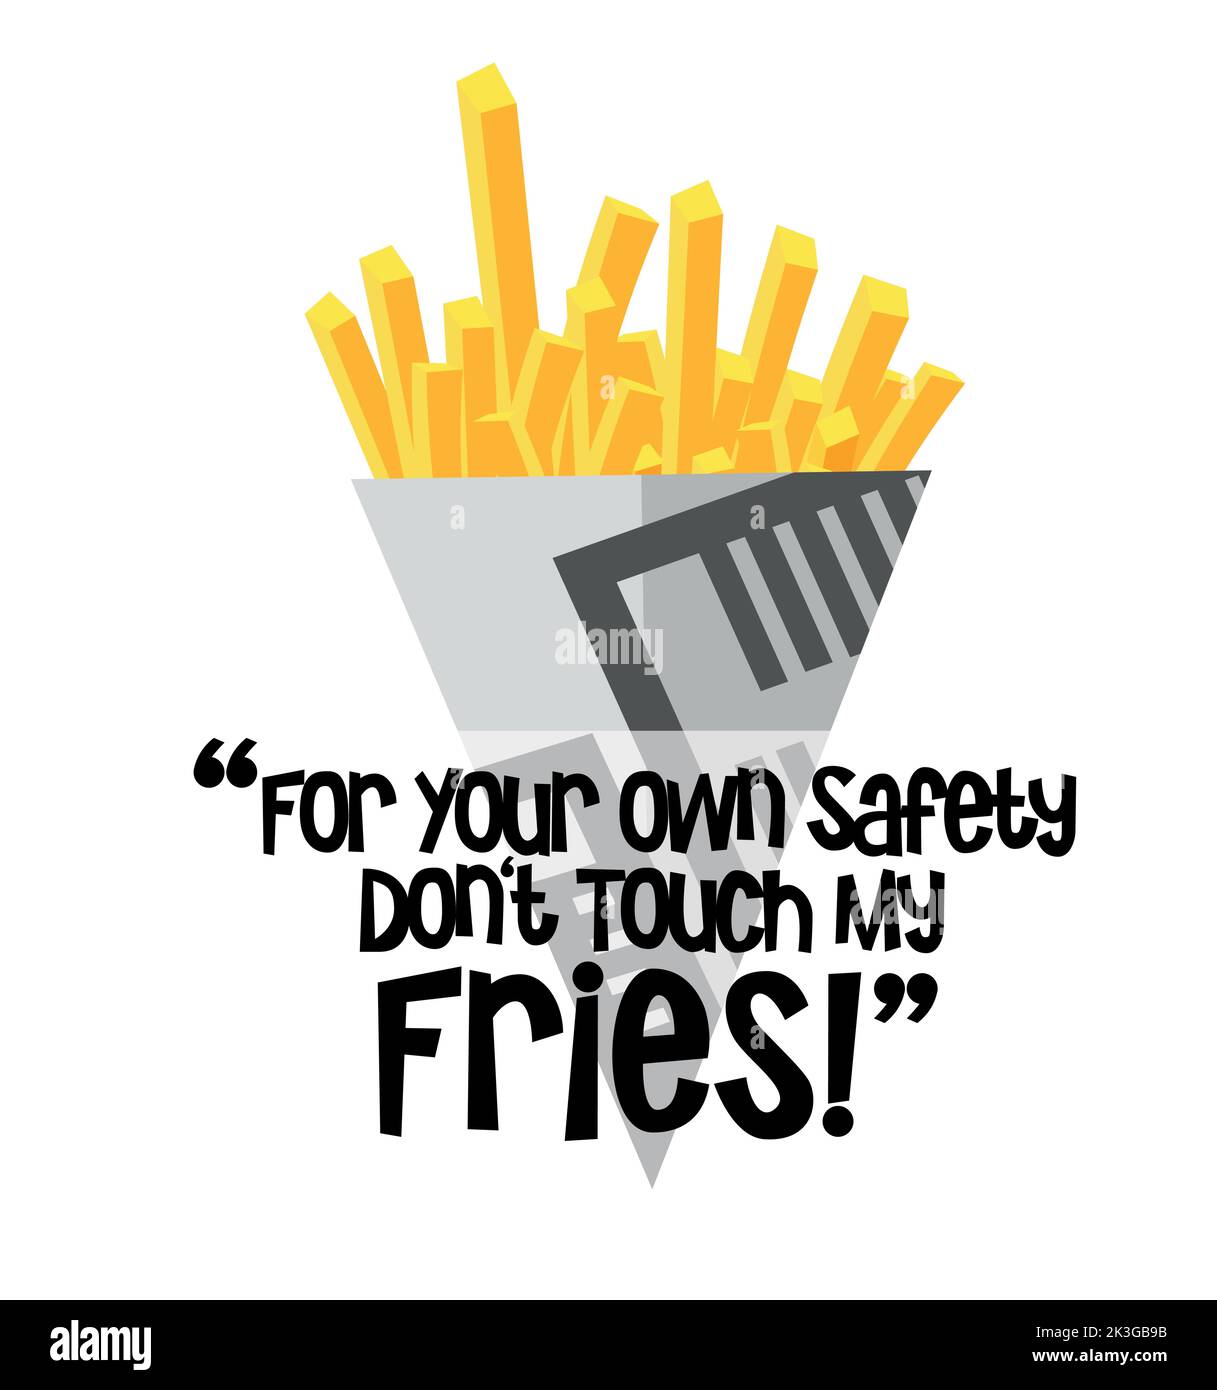 For Your Own Safety Don't touch my Fries, chip cone vector illustration on a White background Stock Vector